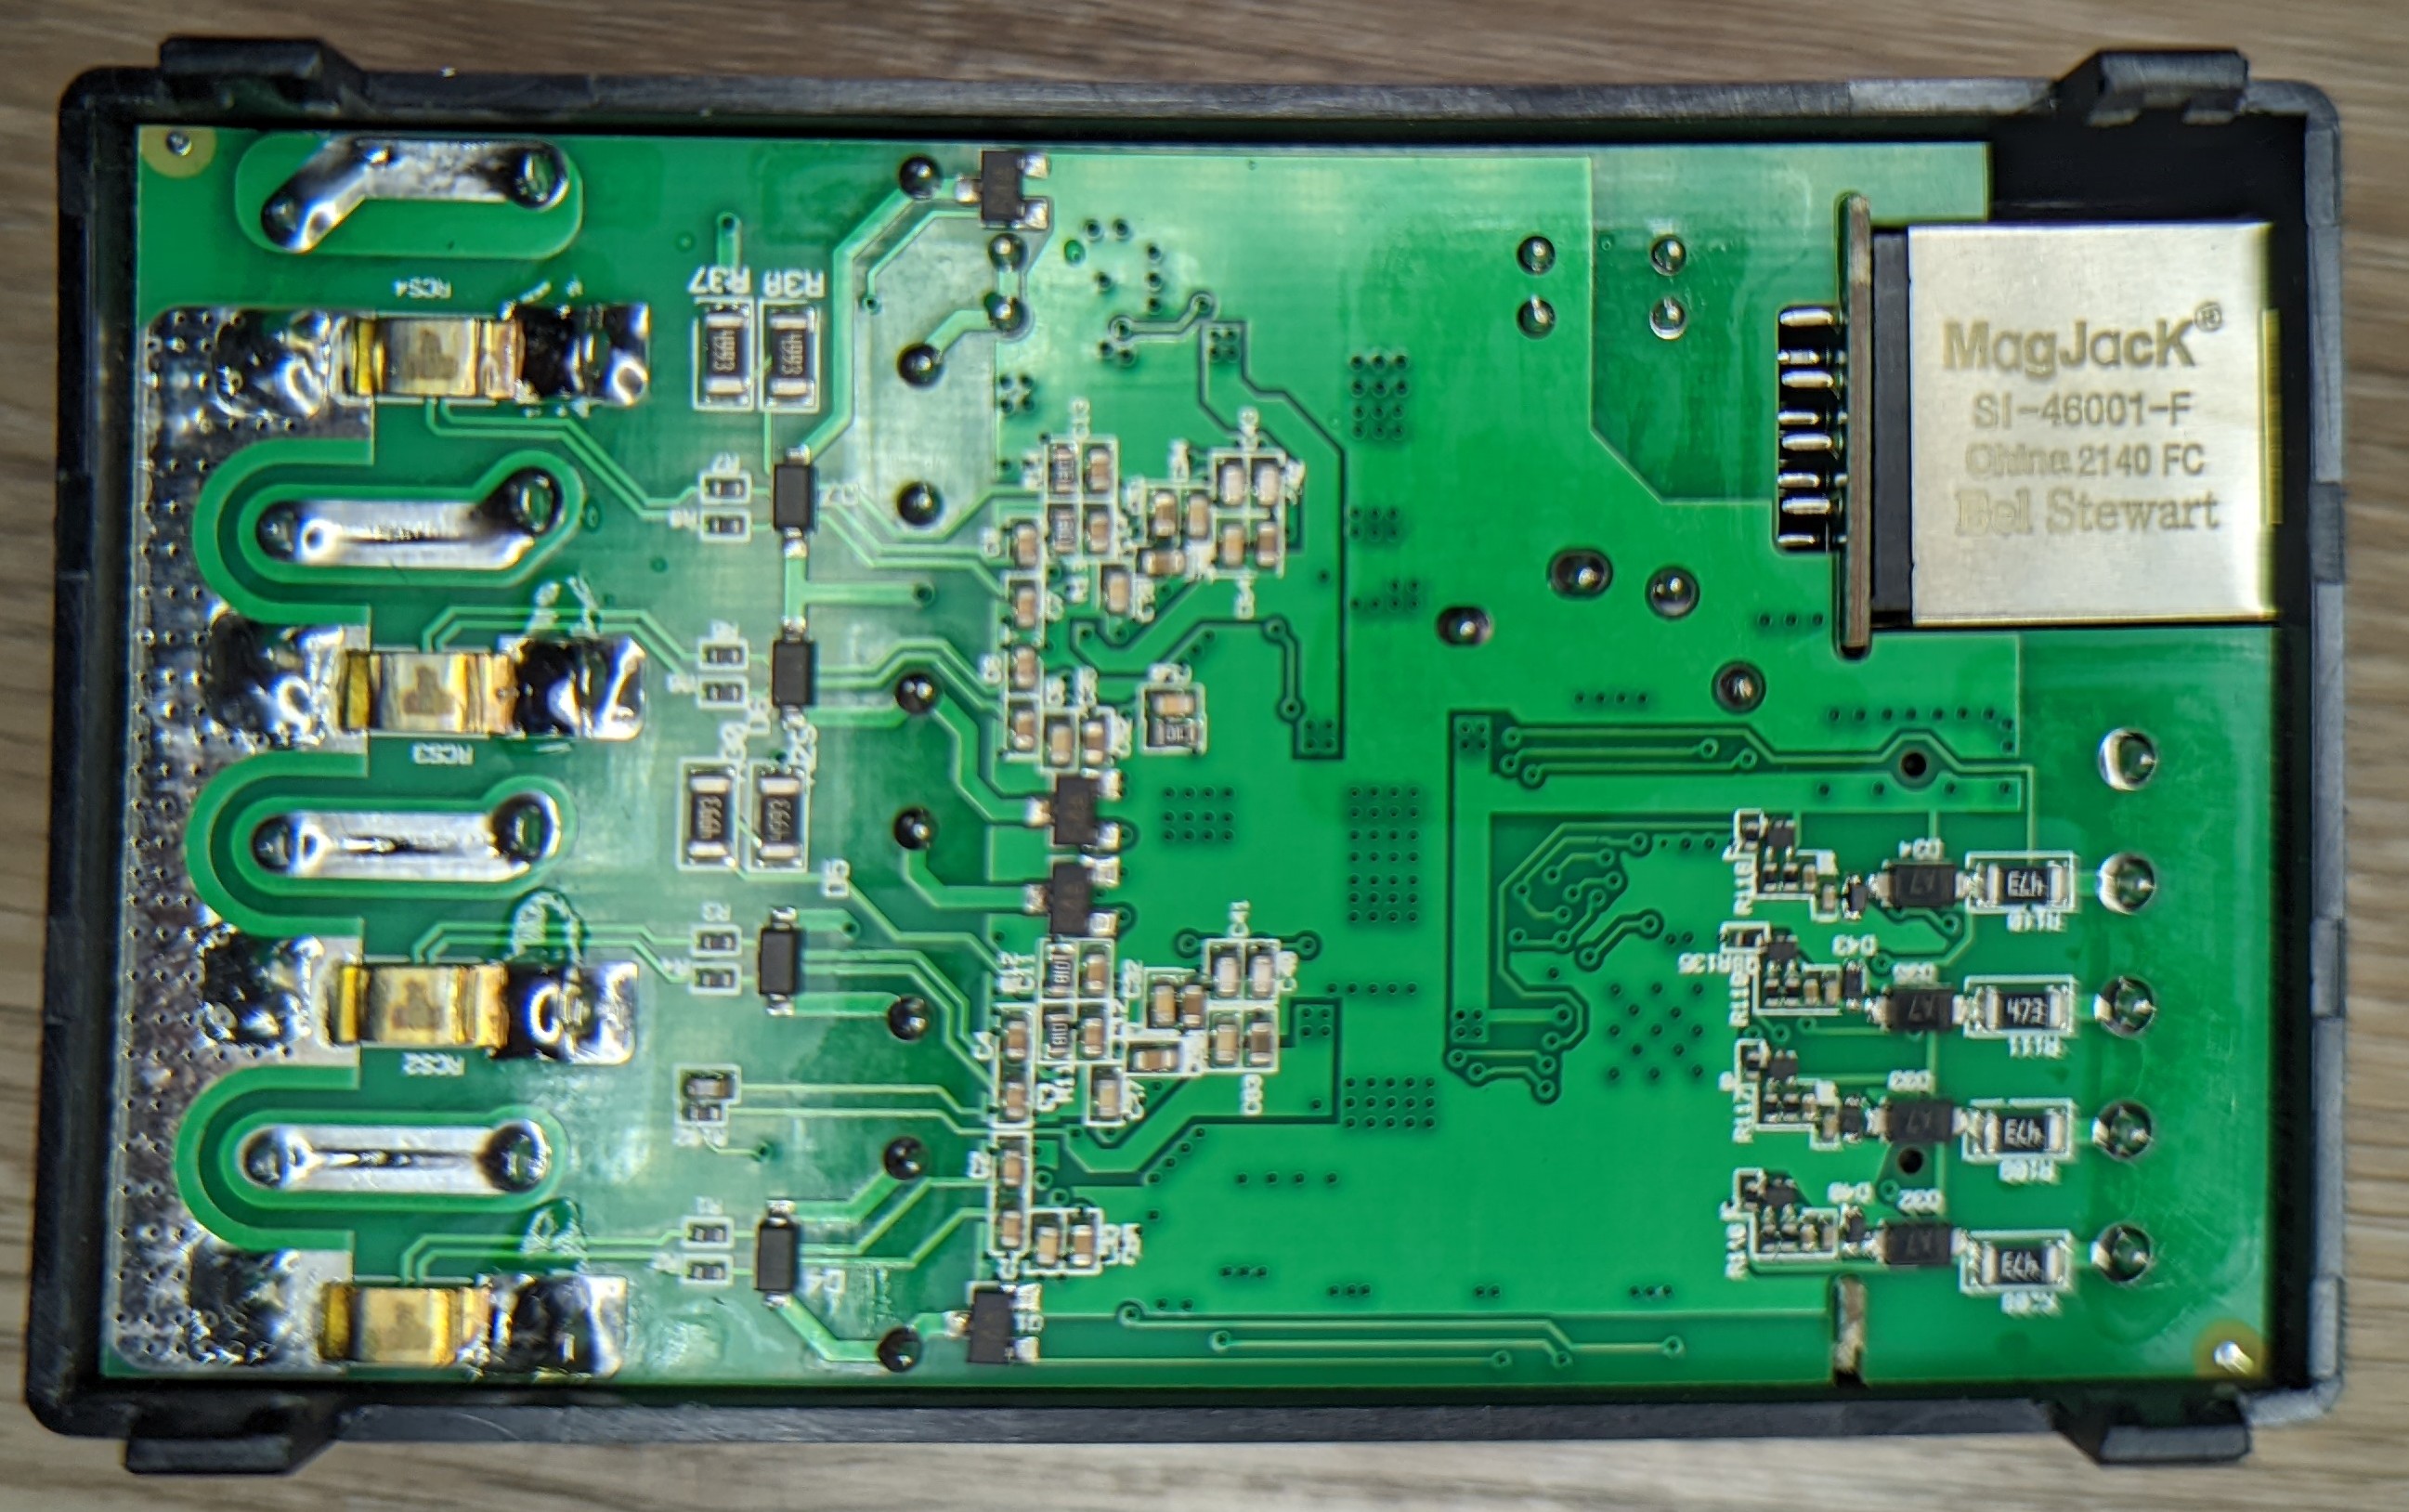 Picture showing the first and largest PCB inside the device. Accessible immediately after removing the rear